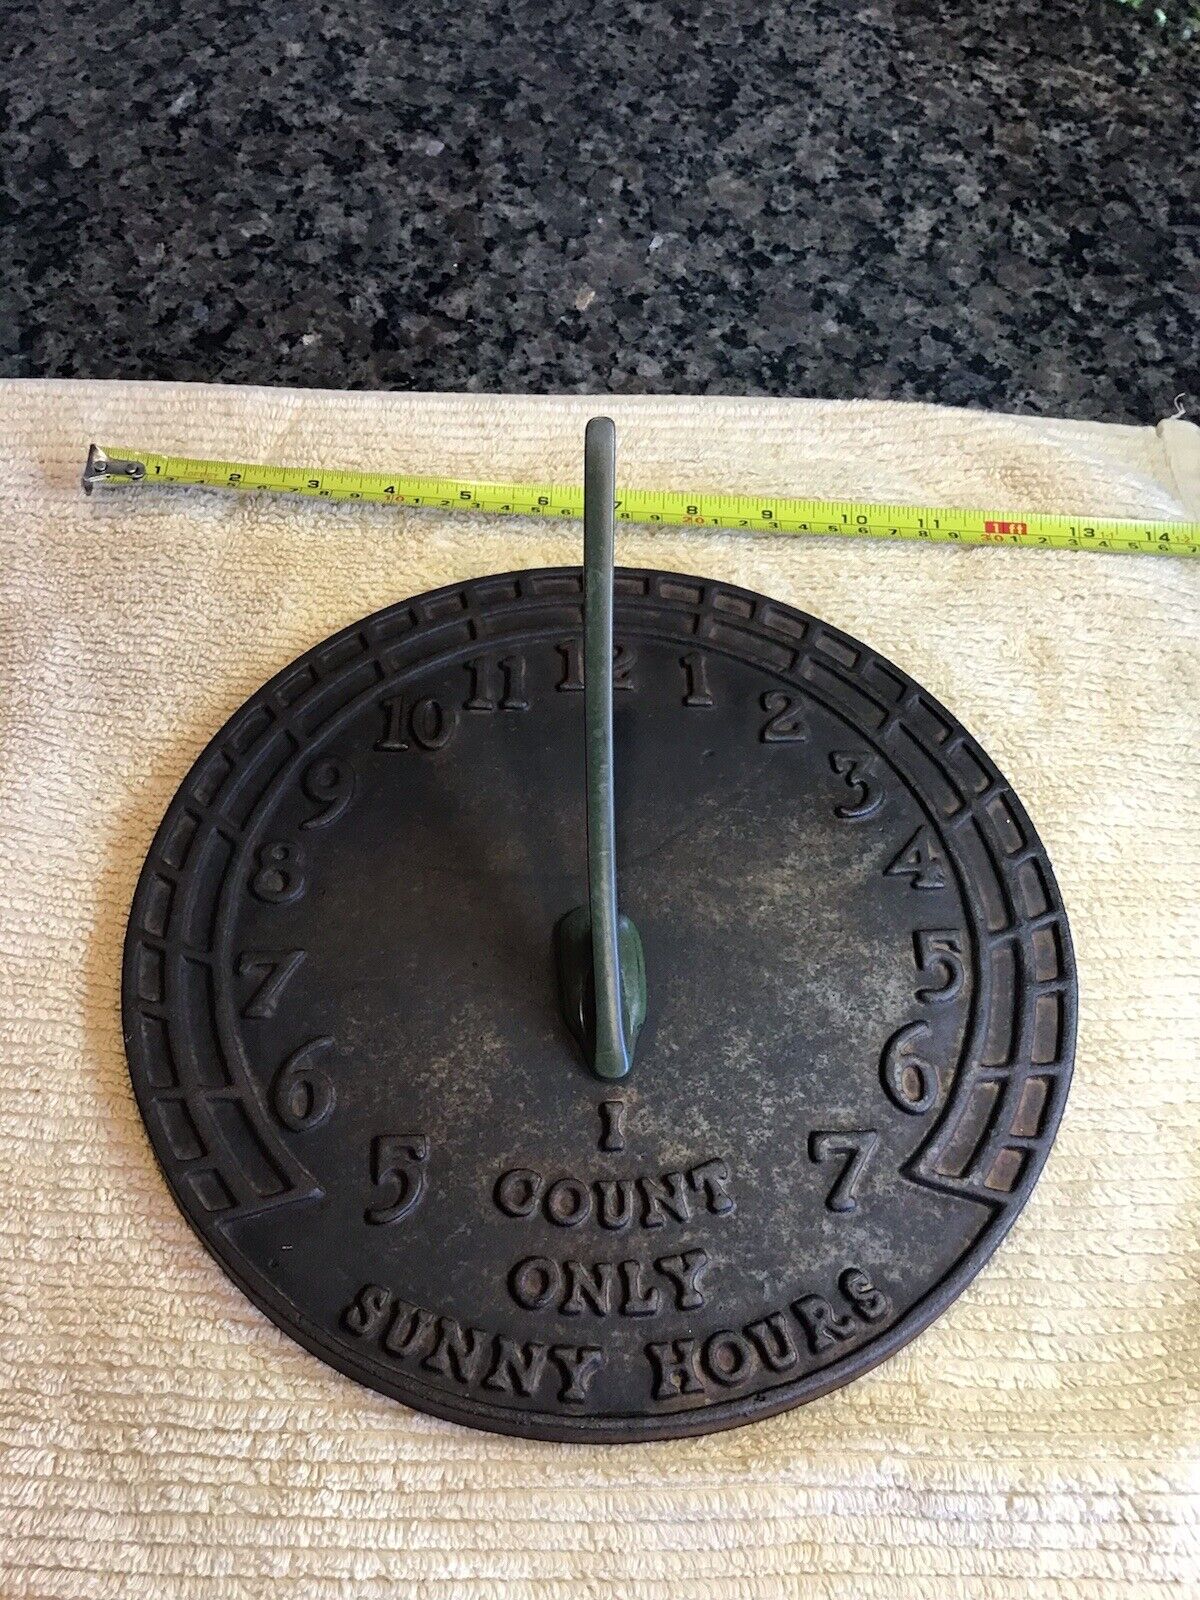 Virginia Metalcrafters Sundial Cast Iron 23-6 I COUNT ONLY SUNNY HOURS 10.5” USA